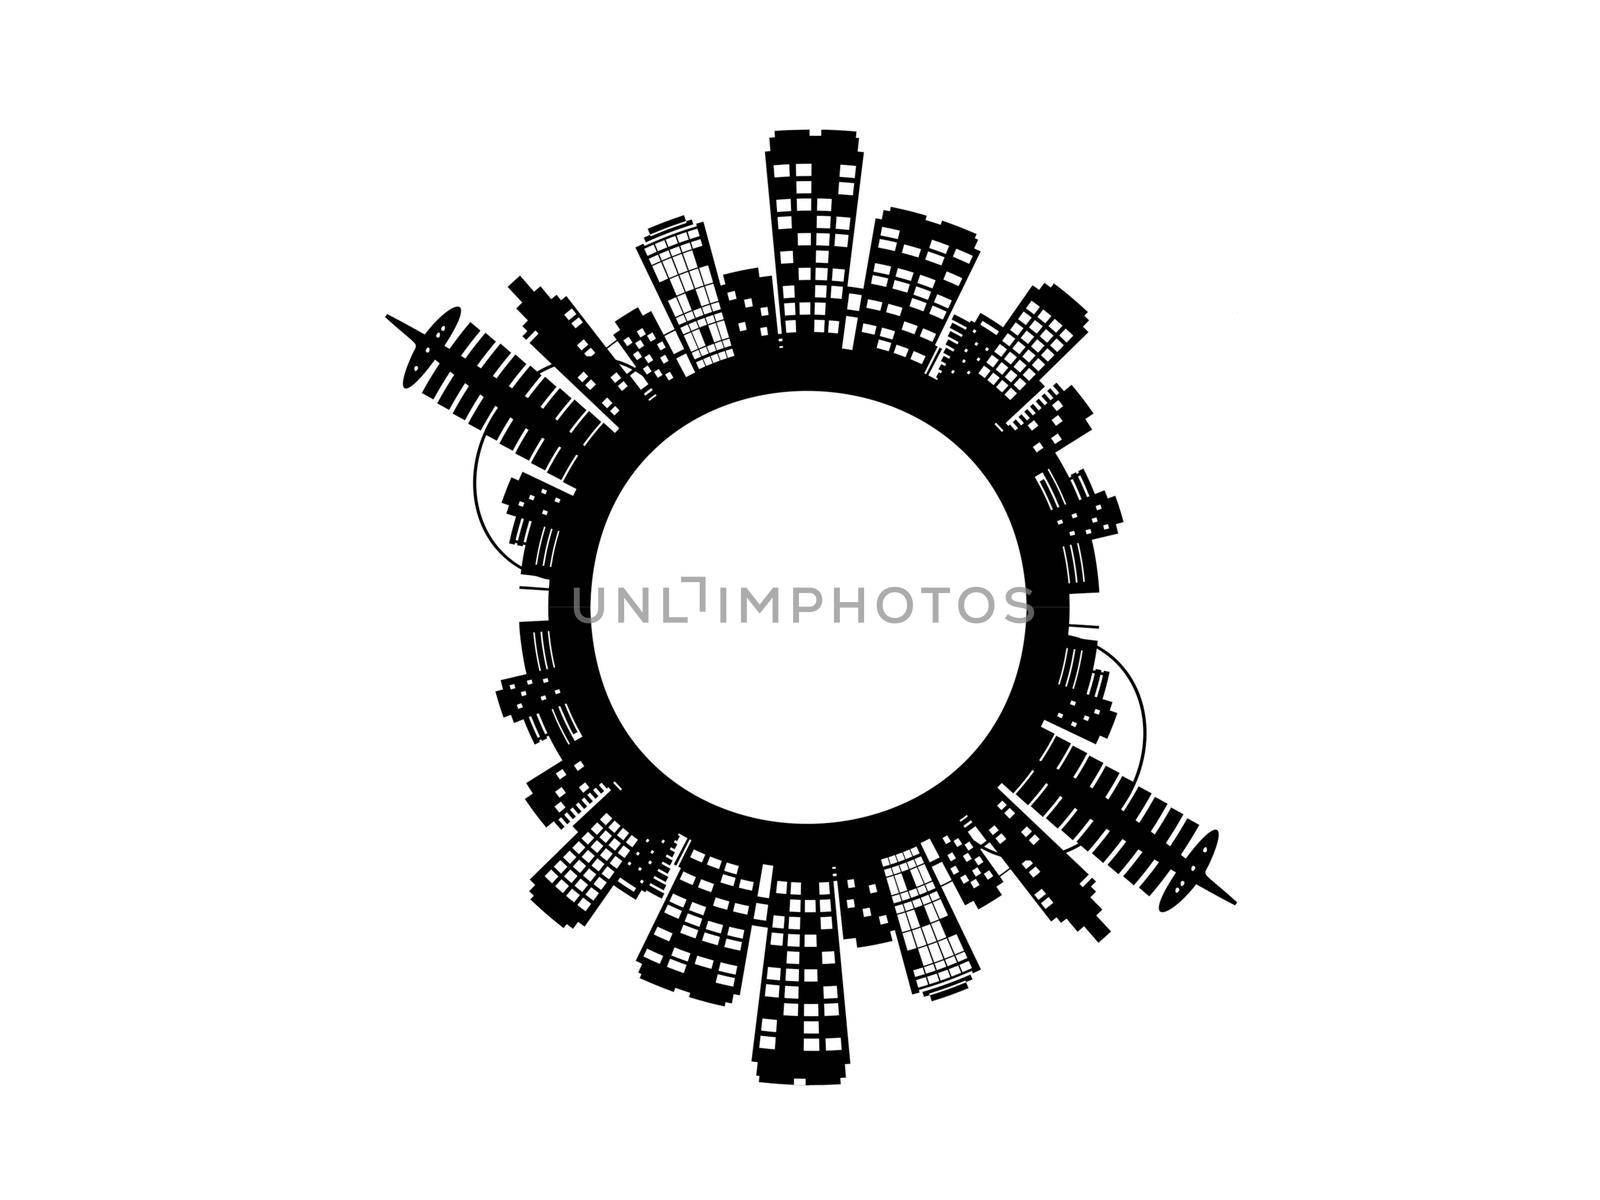 beautiful city illustration on white background - 3d rendering by mariephotos